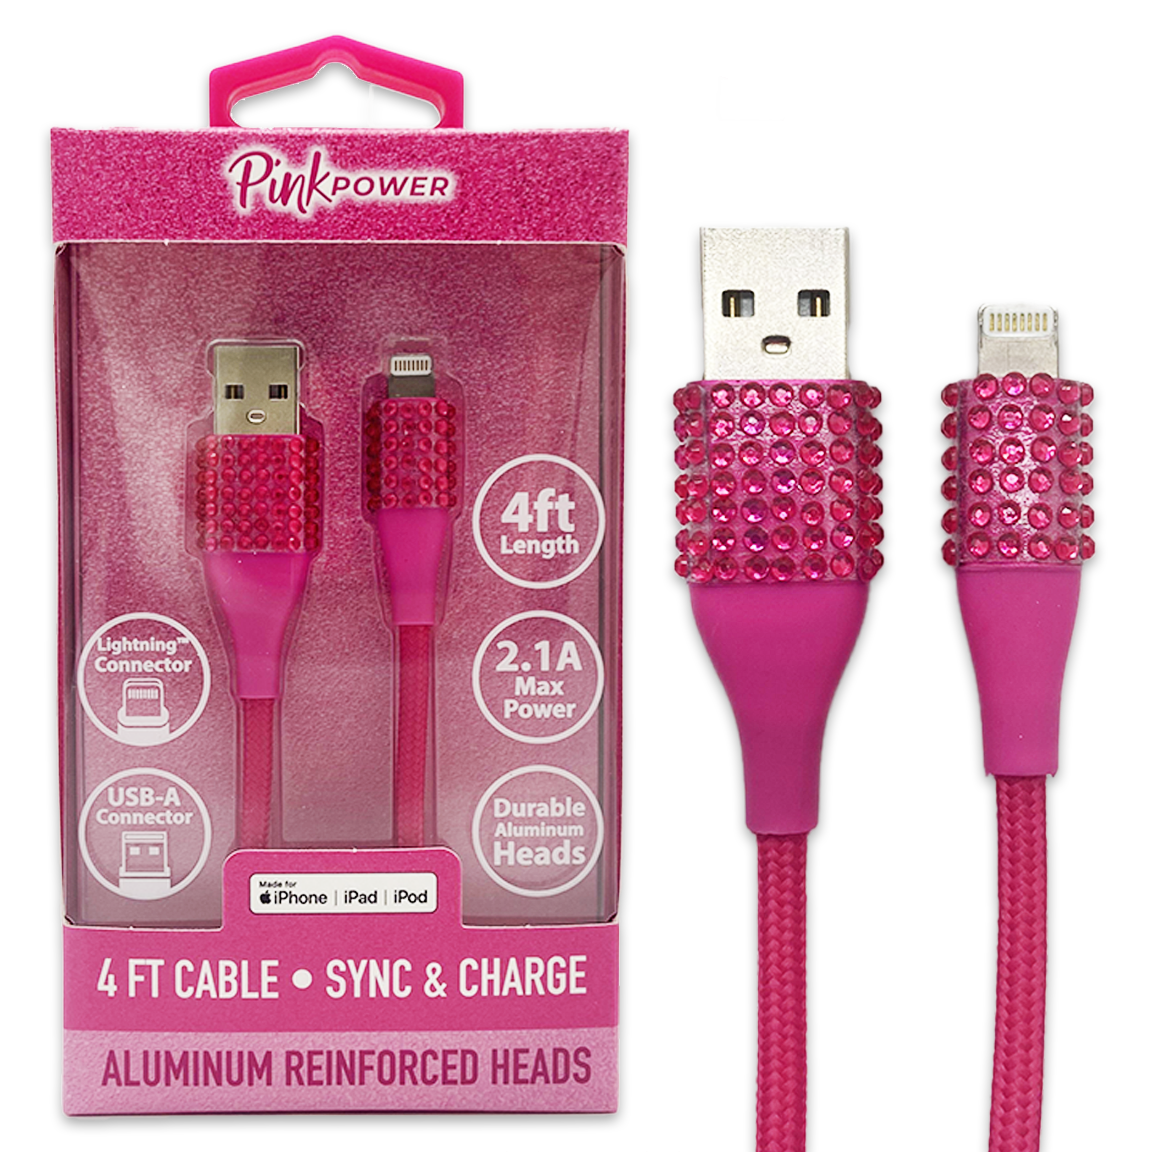 Car Charger / Wall Charger / Charging Cable Pink Power Assortment - 20 Pieces Per Retail Ready Display 88527